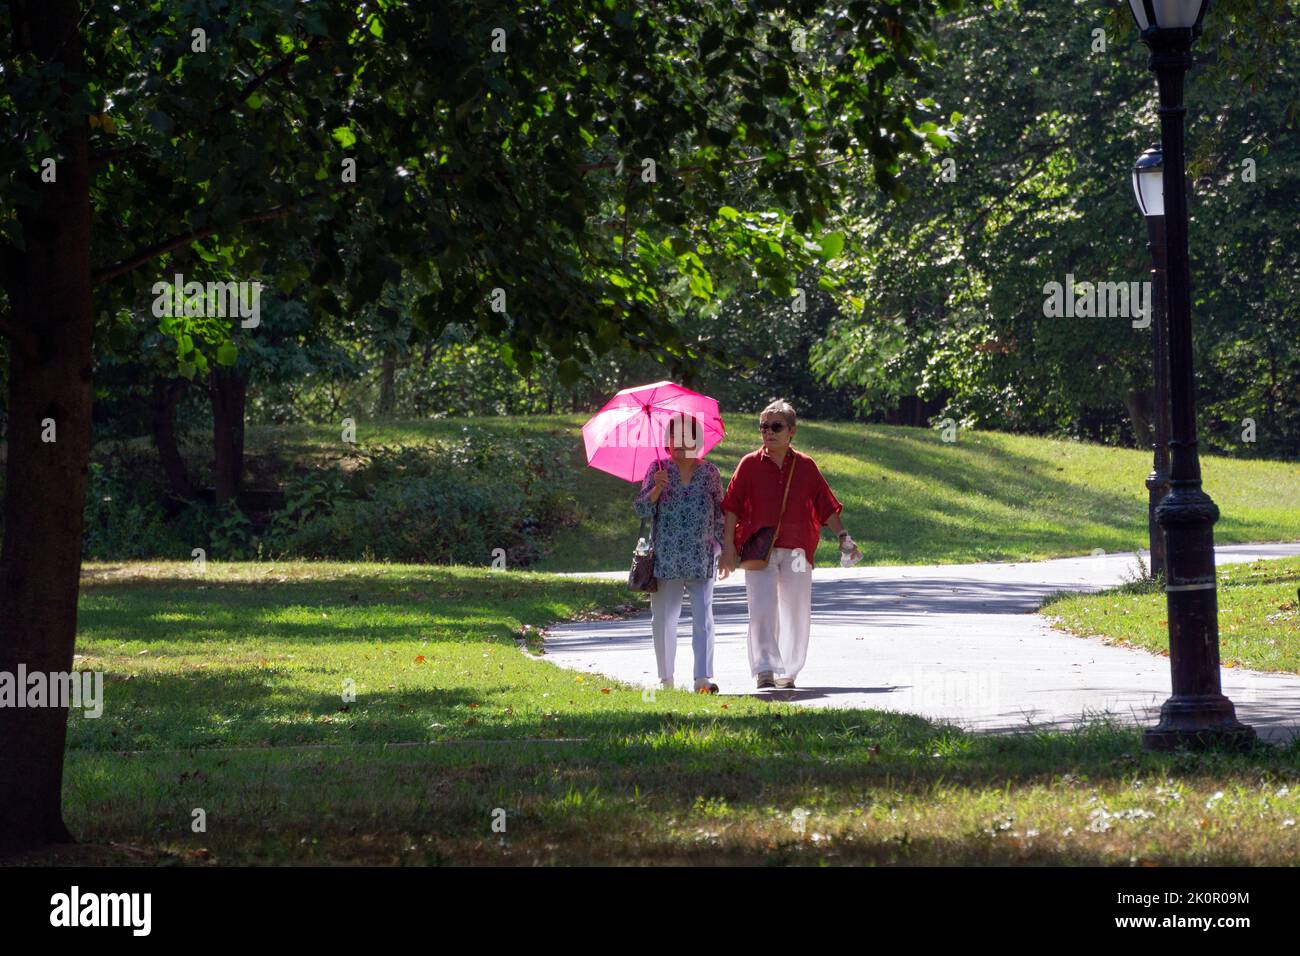 Two middle age Asian American women take an exercise walk on a sunny late summer day. One shields herself from the sun with a bright magenta umbrella. Stock Photo